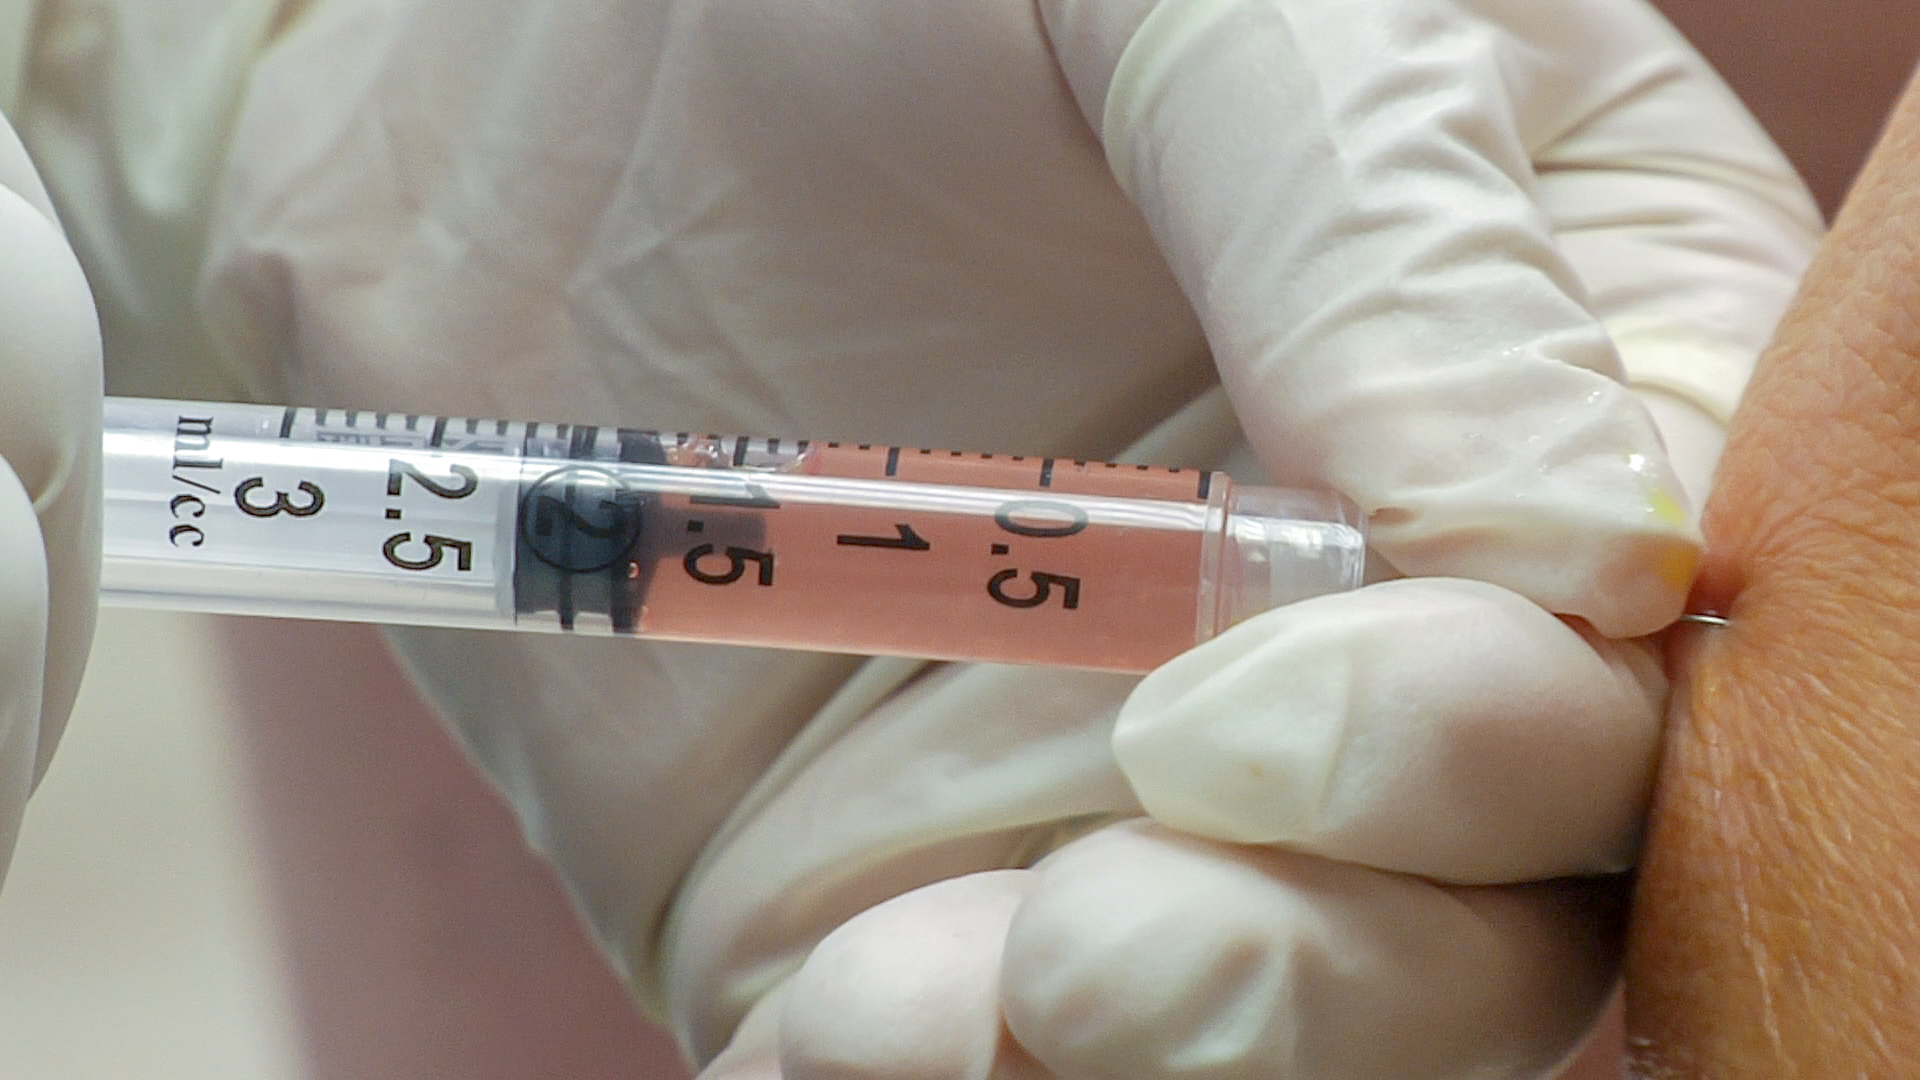 Stem cells in syringe being injected into knee